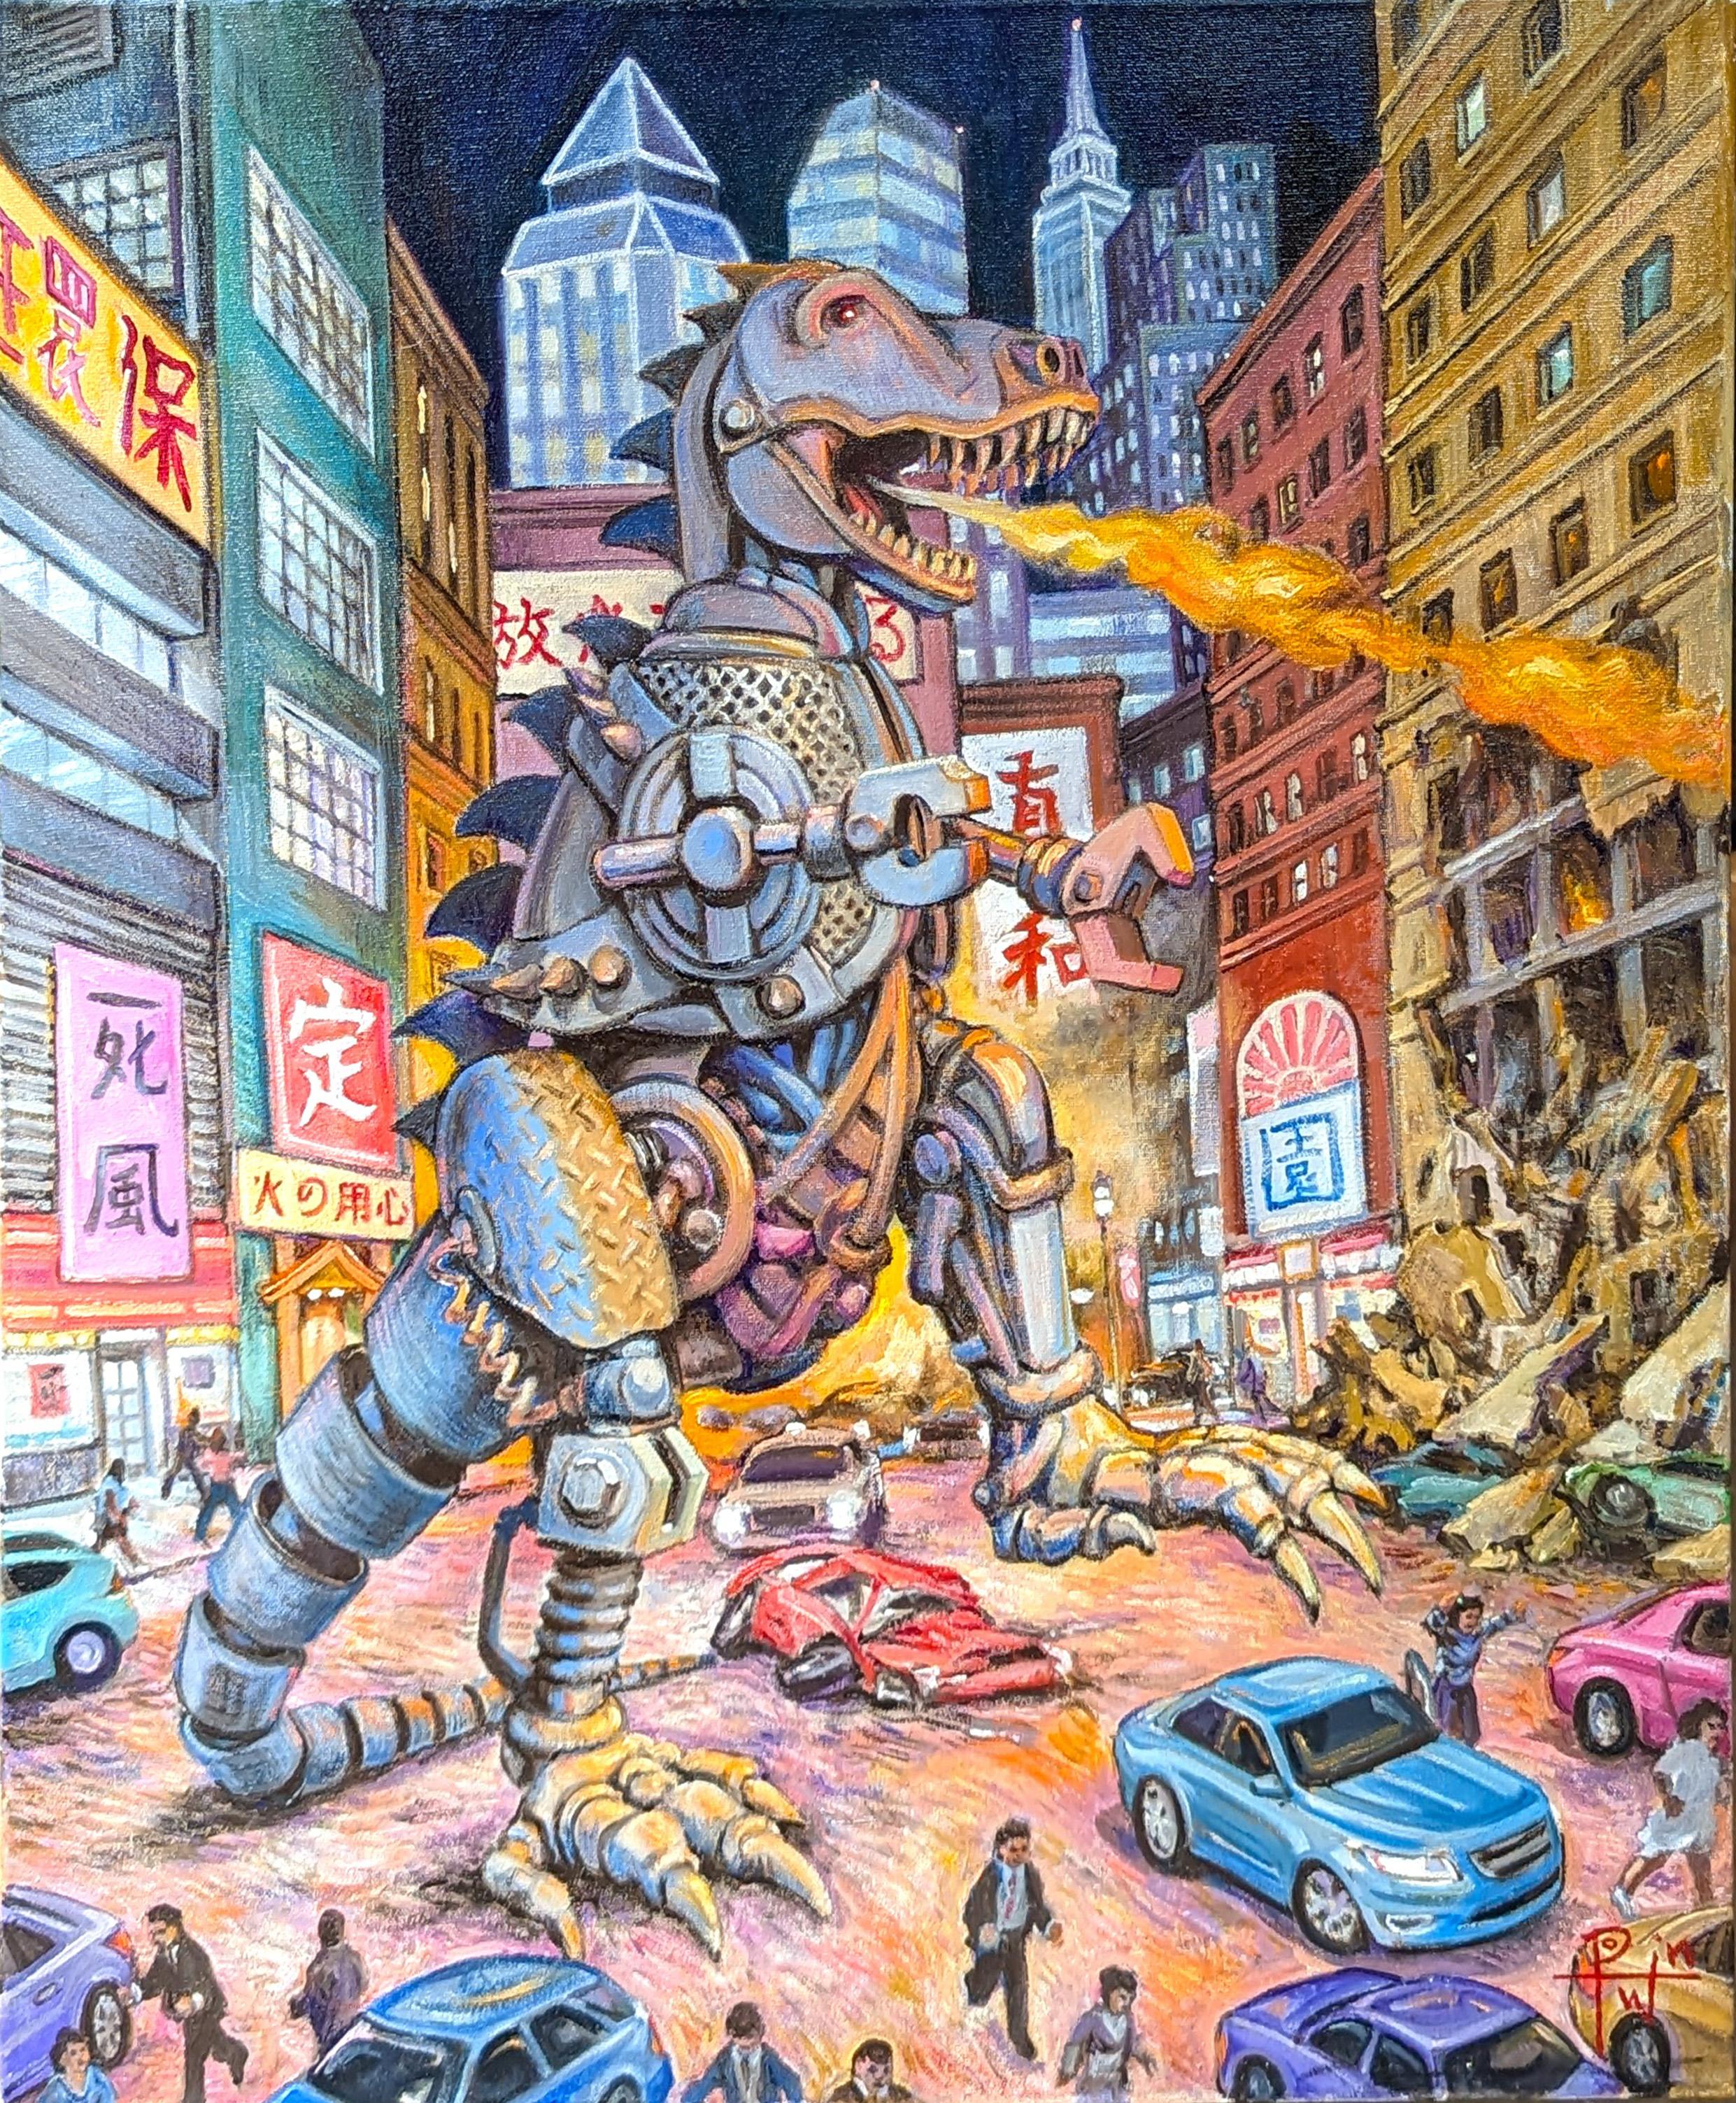 "Batteries Not Included" Contemporary Surrealist Godzilla Inspired Cityscape 